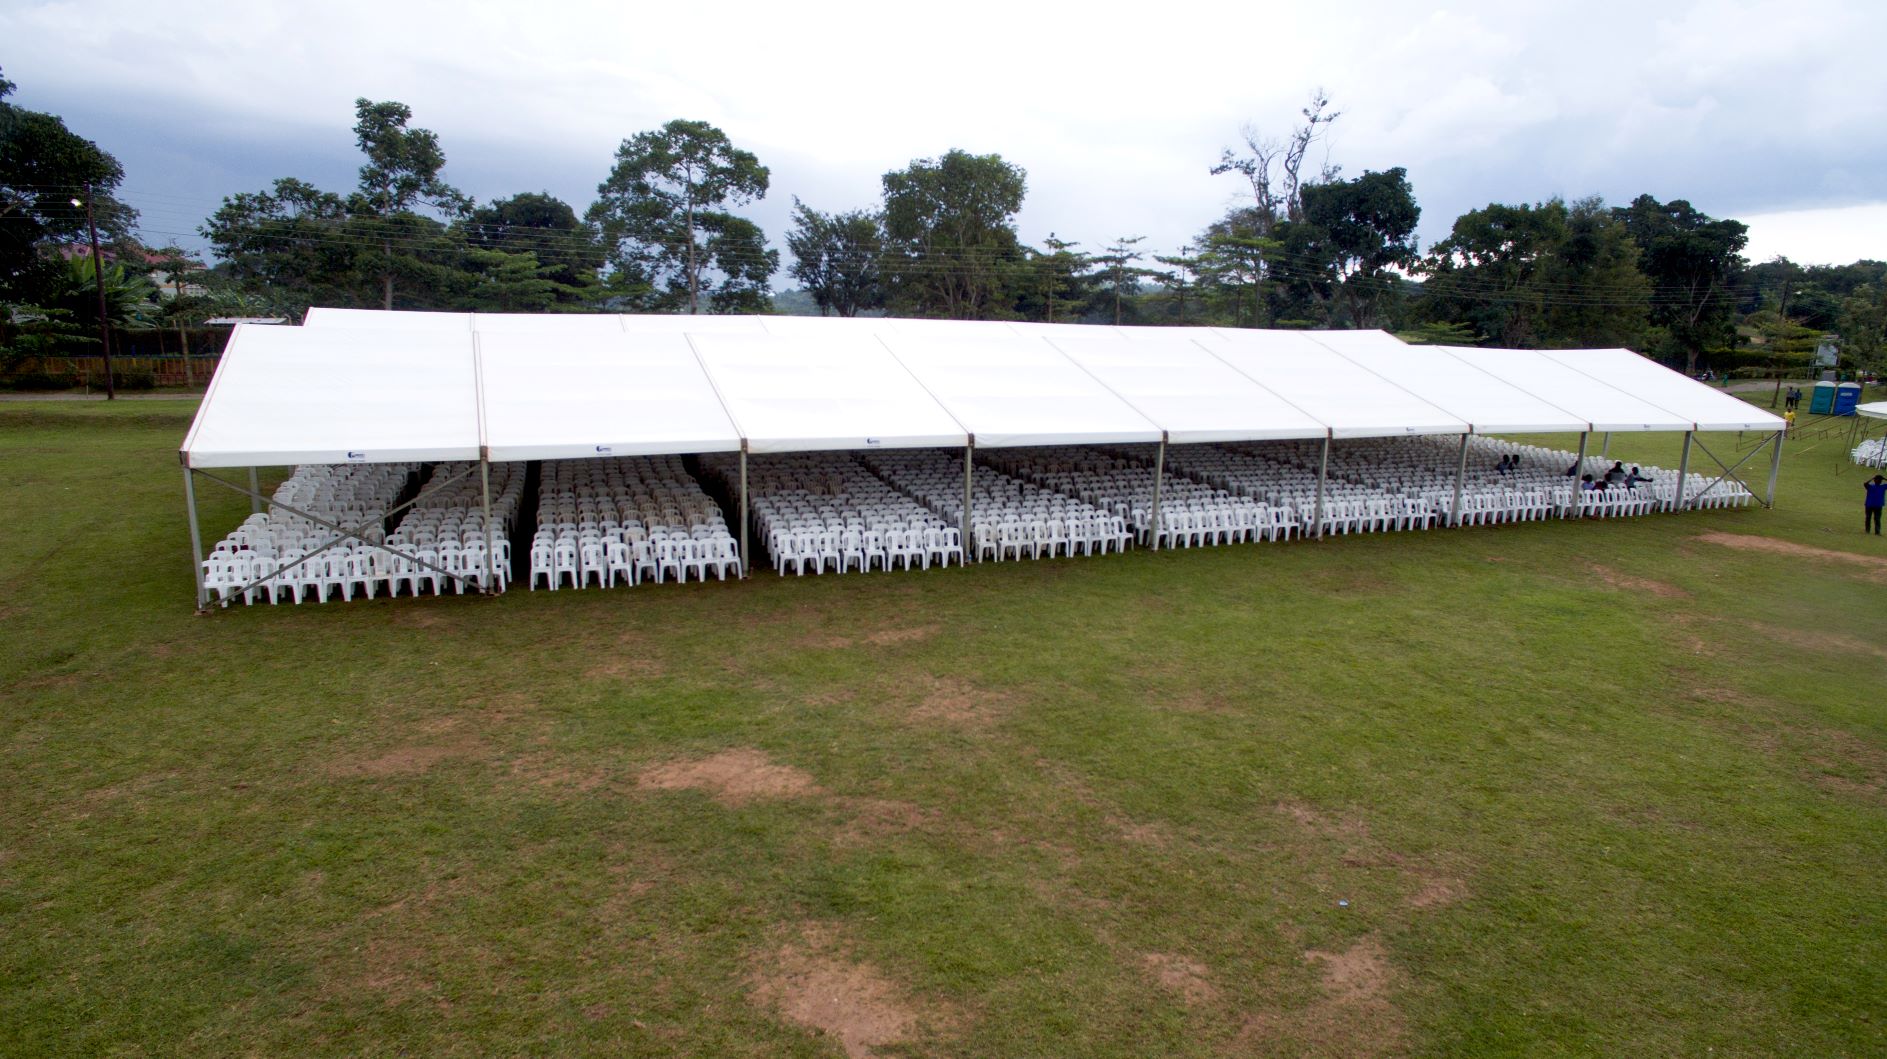 Our Multiflex tents are an excellent choice for corporate functions and university graduations